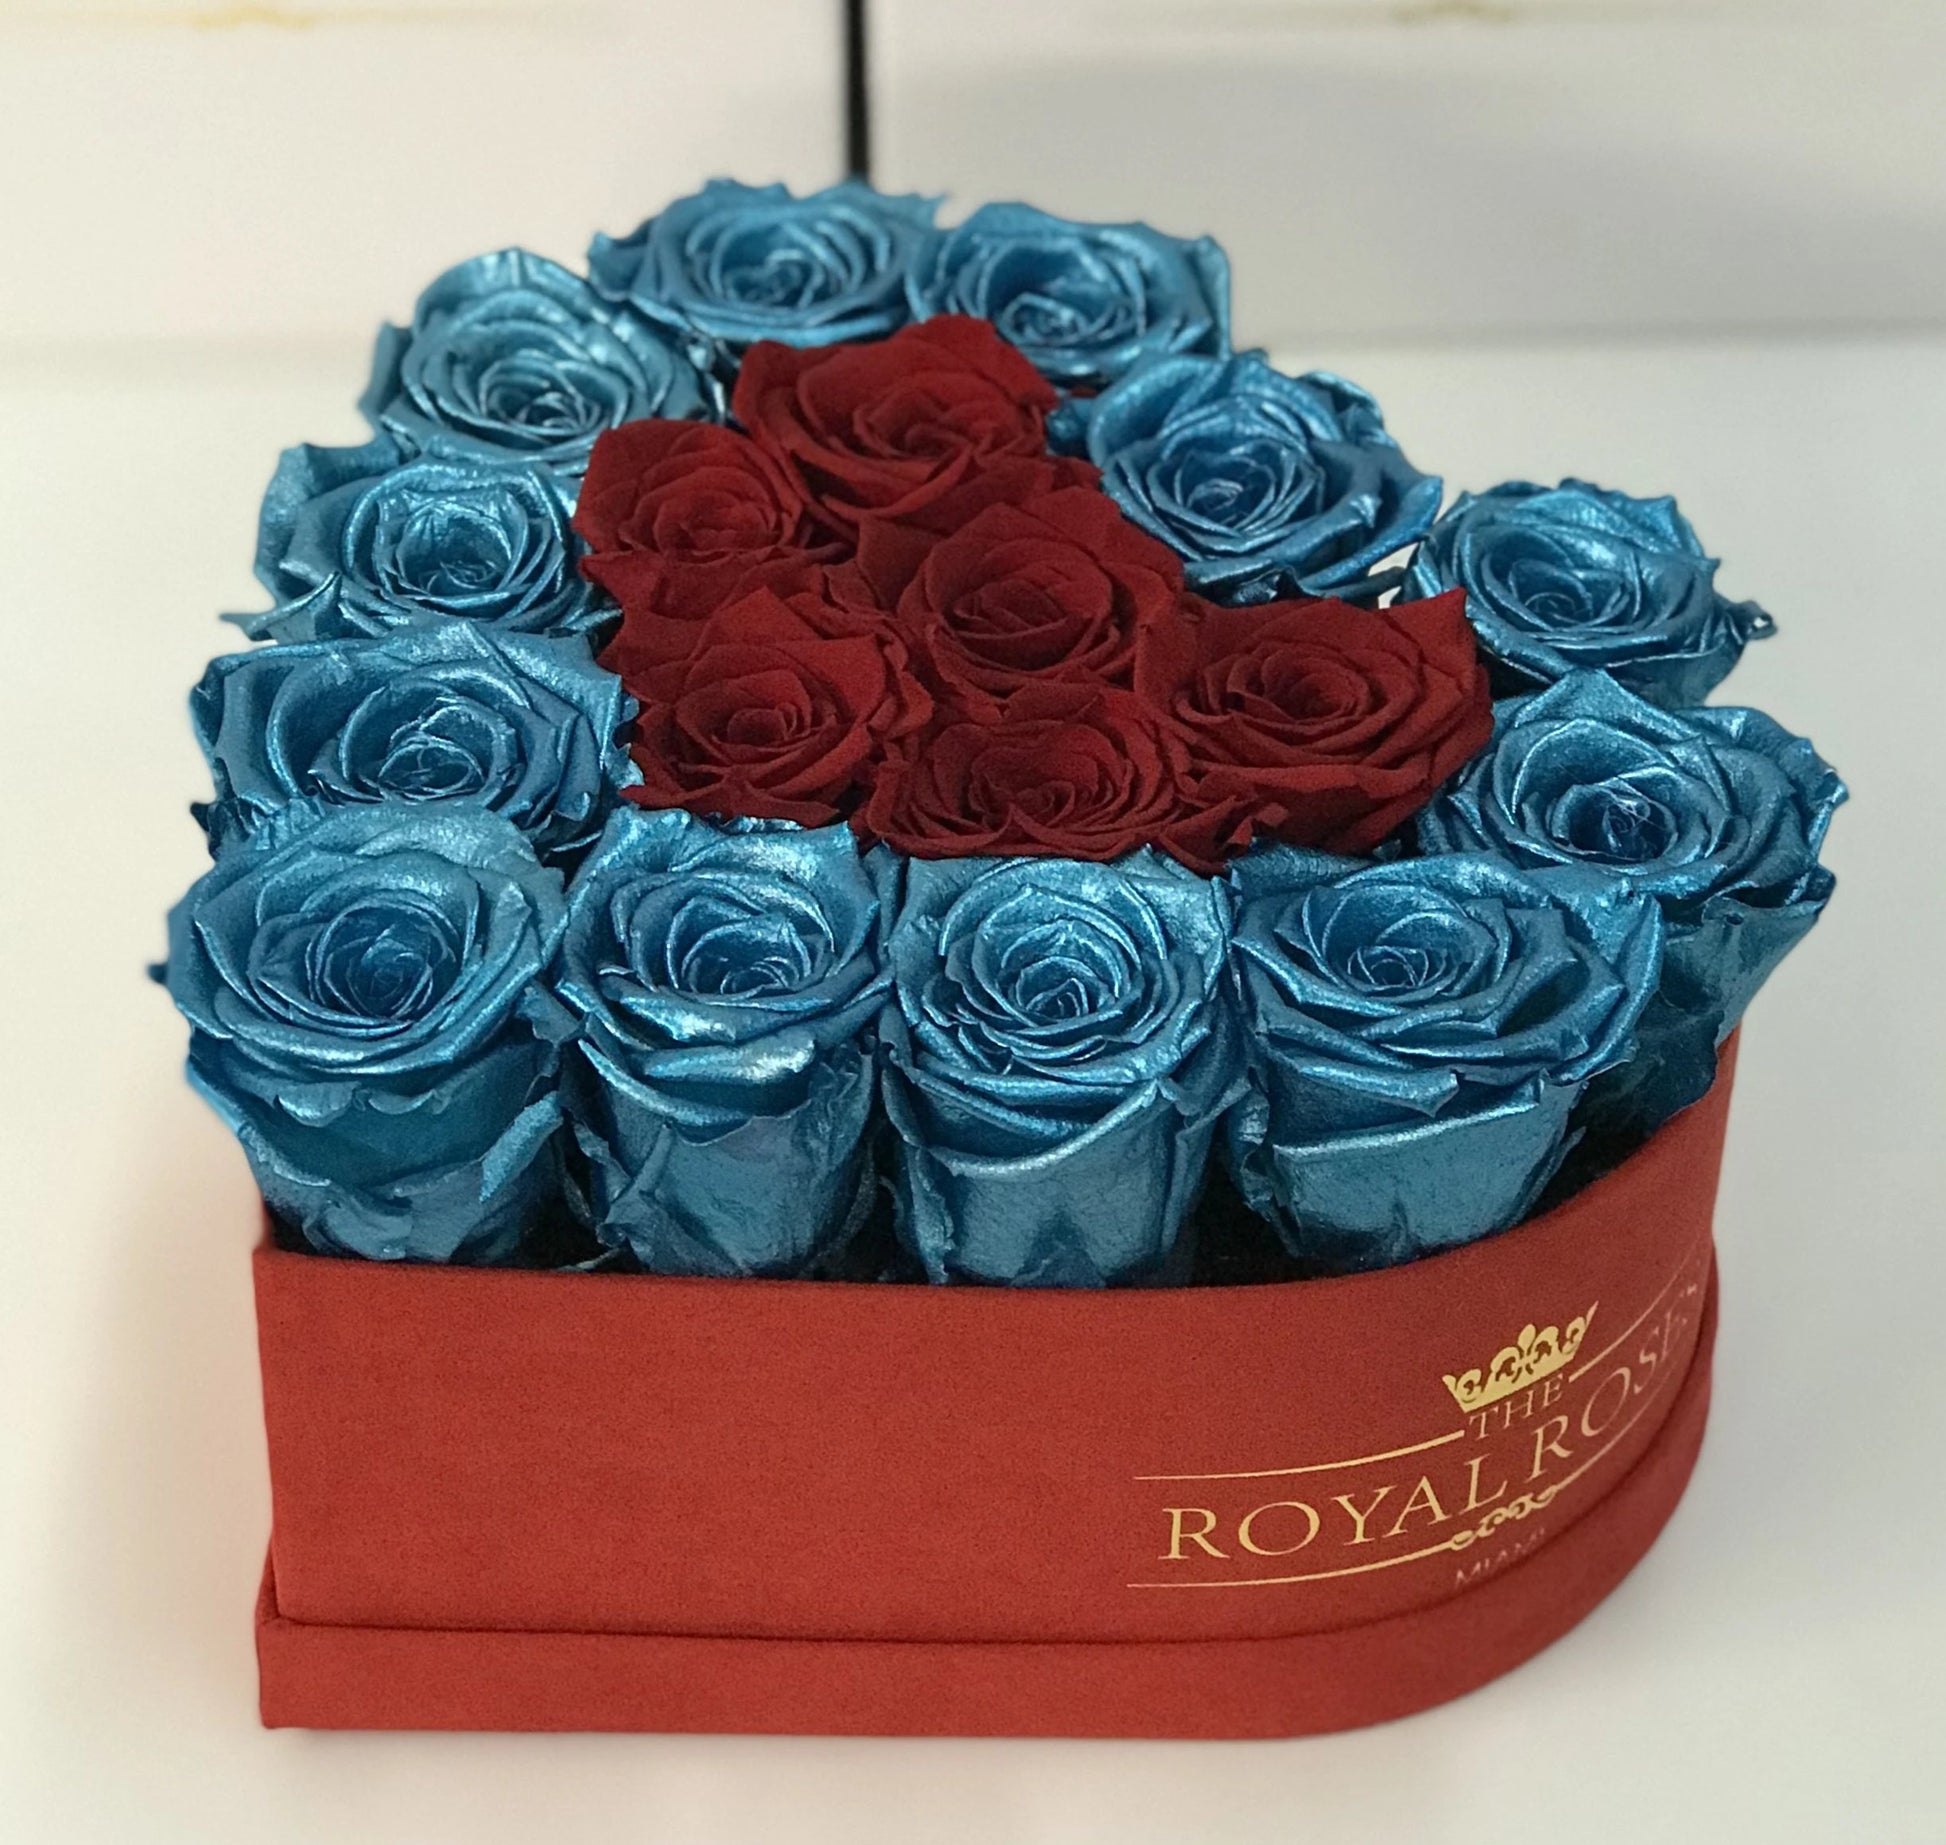 Real Long Lasting Roses - Heart Shaped Box - Lifetime is Over 1 Year - The Royal Roses 